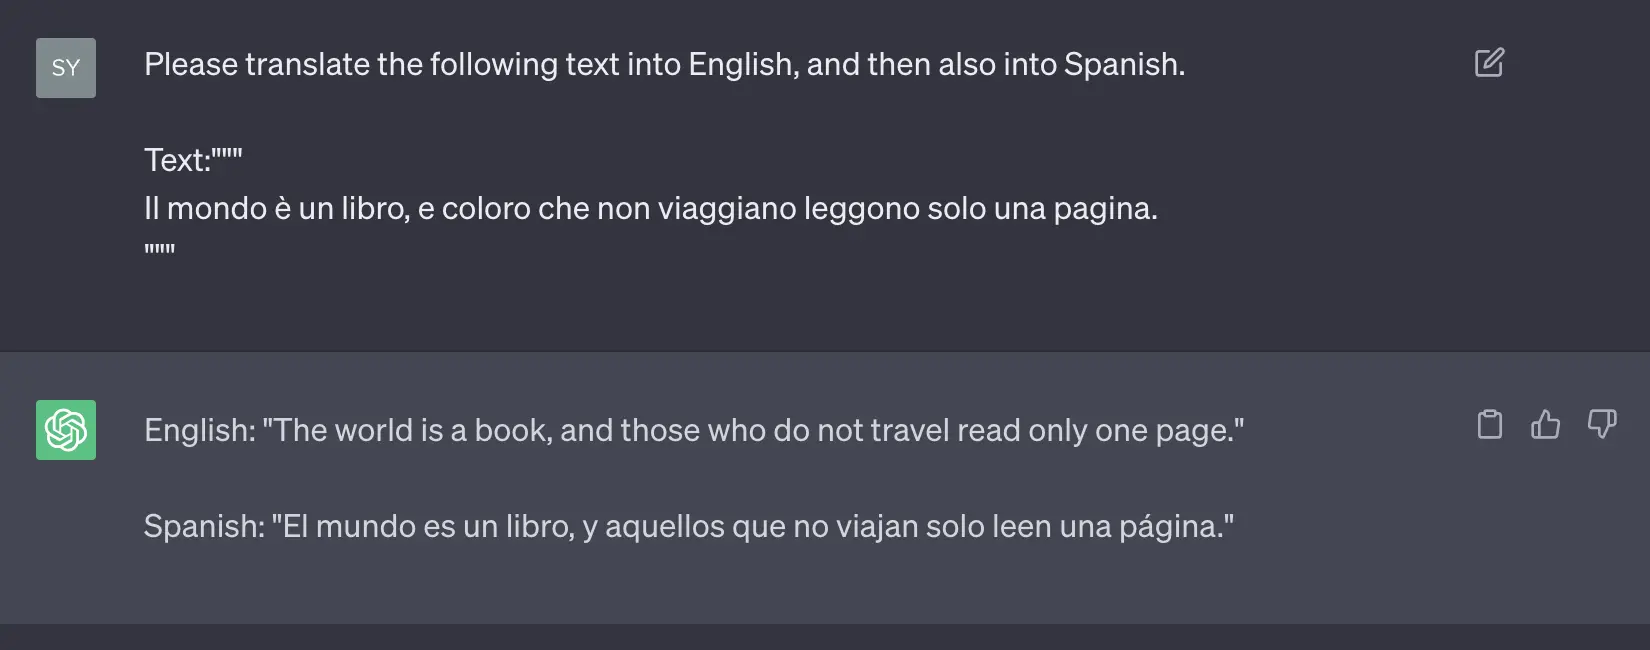 A sample dialogue with ChatGPT showing its language translation capabilities